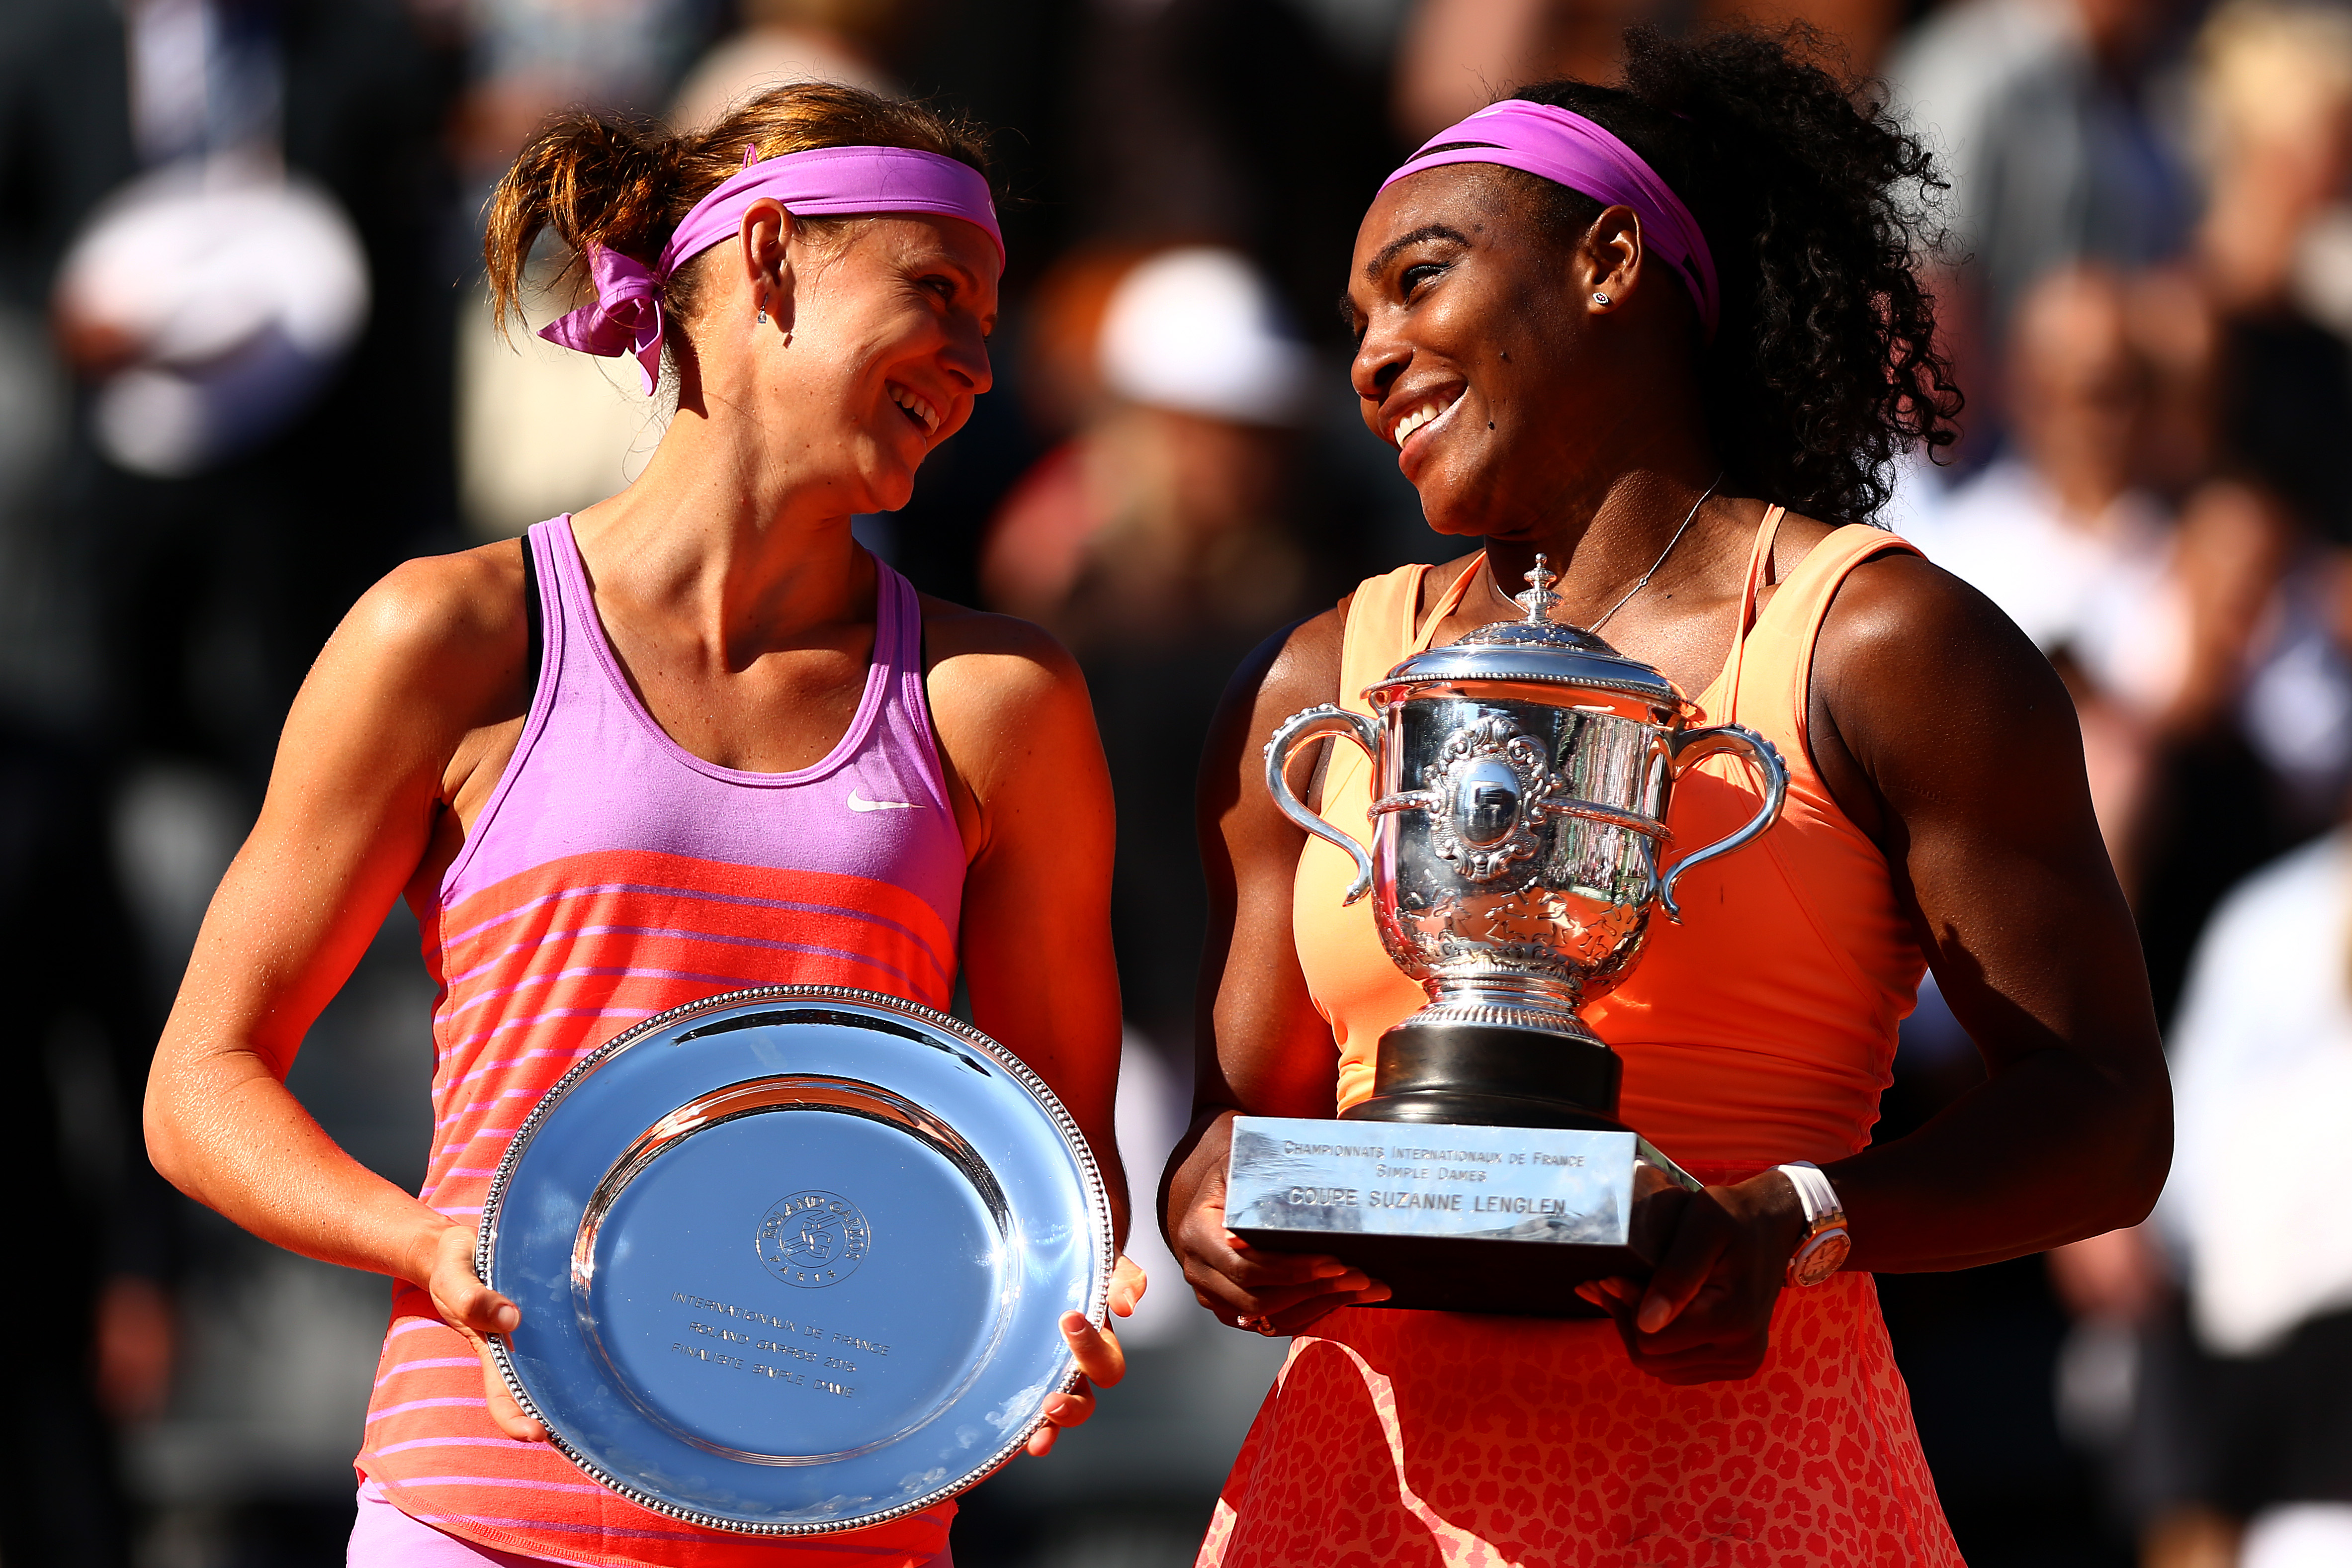 PARIS, FRANCE - JUNE 06: Serena Williams of the United States poses with the Coupe Suzanne Lenglen trophy next to Lucie Safarova of Czech Republic after winning their Women's Singles Final on day fourteen of the 2015 French Open at Roland Garros on June 6, 2015 in Paris, France. (Photo by Dan Istitene/Getty Images)